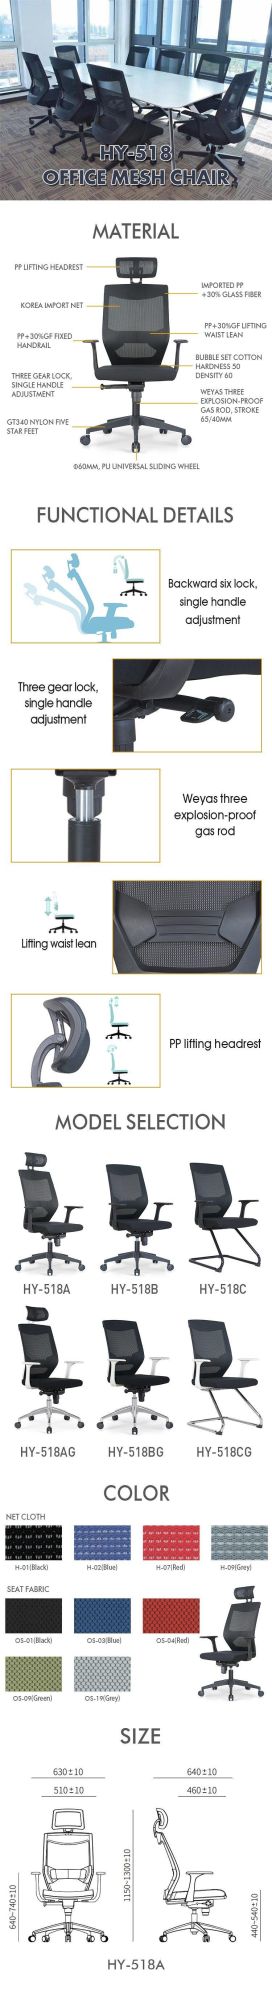 China Wholesale Furniture Executive Mesh High Back Office Chair